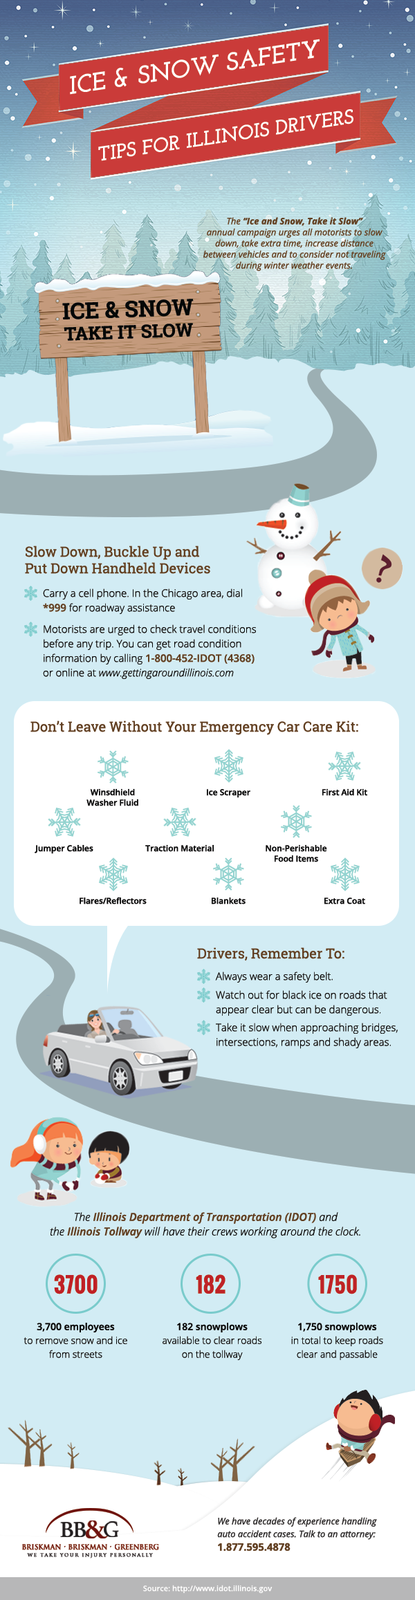 Briskman Briskman & Greenberg released this infographic and a safety video to help motorist stay safe this holiday season.